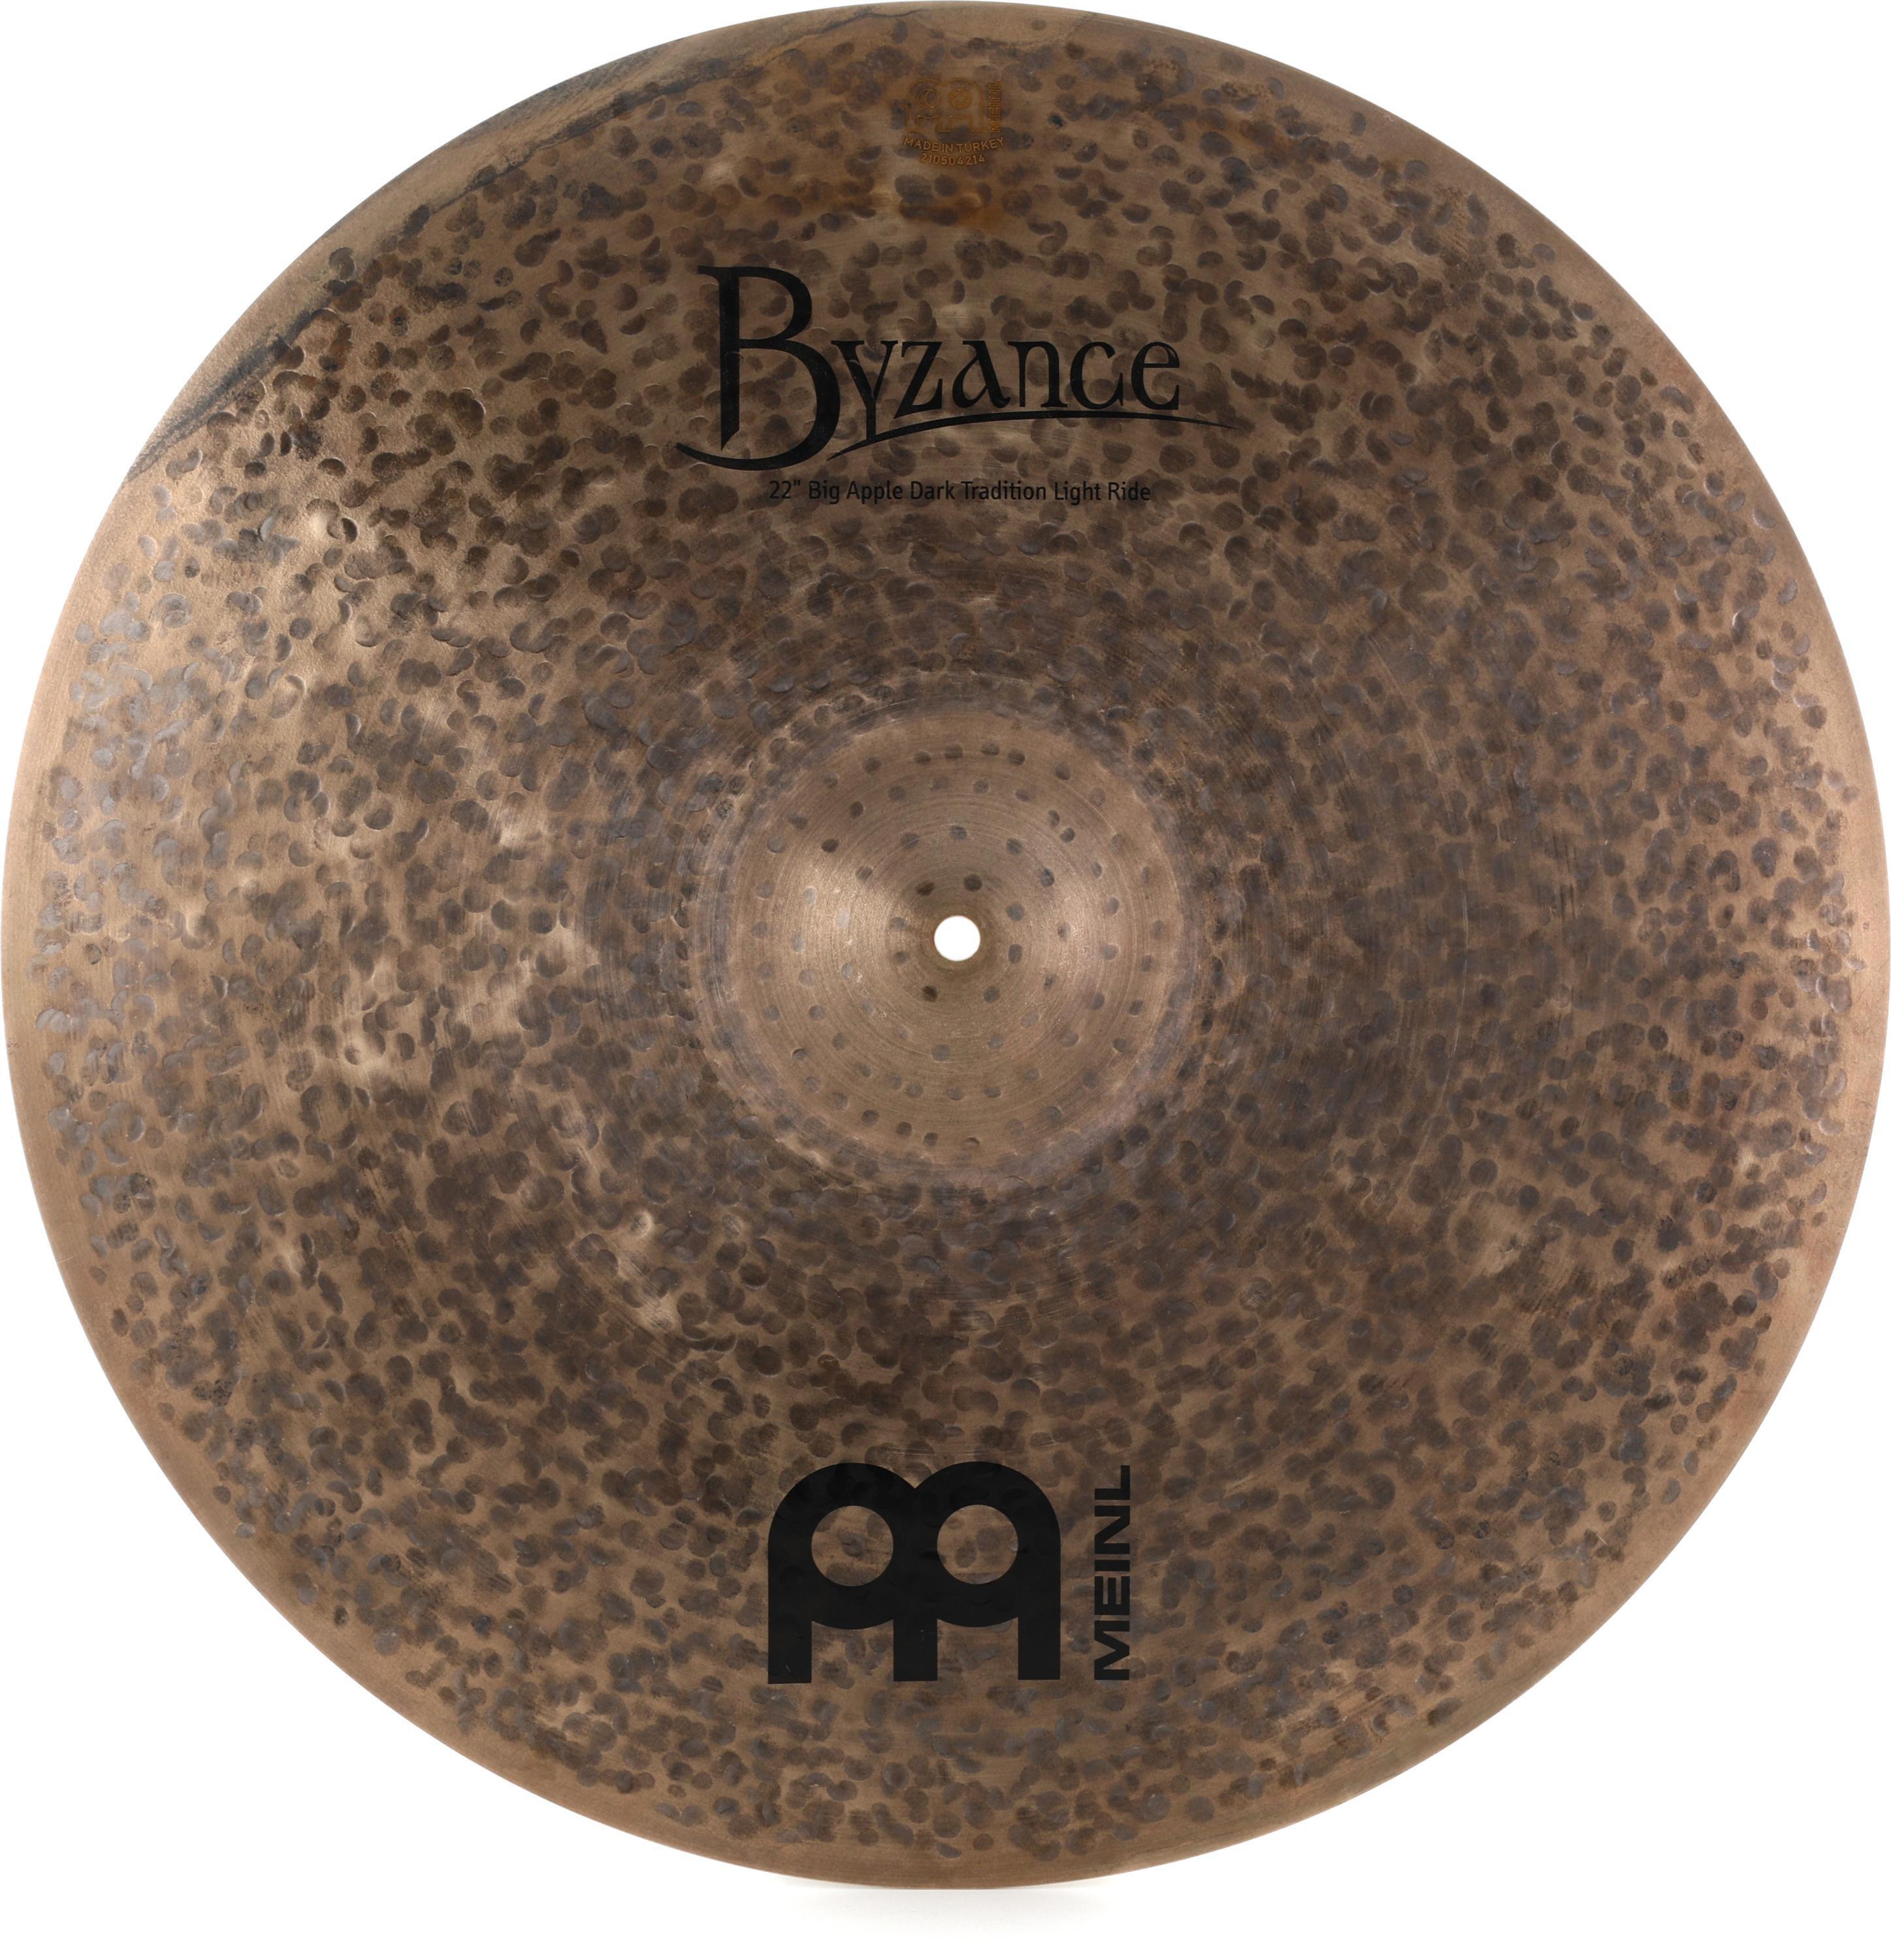 Ride　Meinl　Cymbals　Light　Byzance　Dark　Tradition　22　Apple　Big　inch　Sweetwater